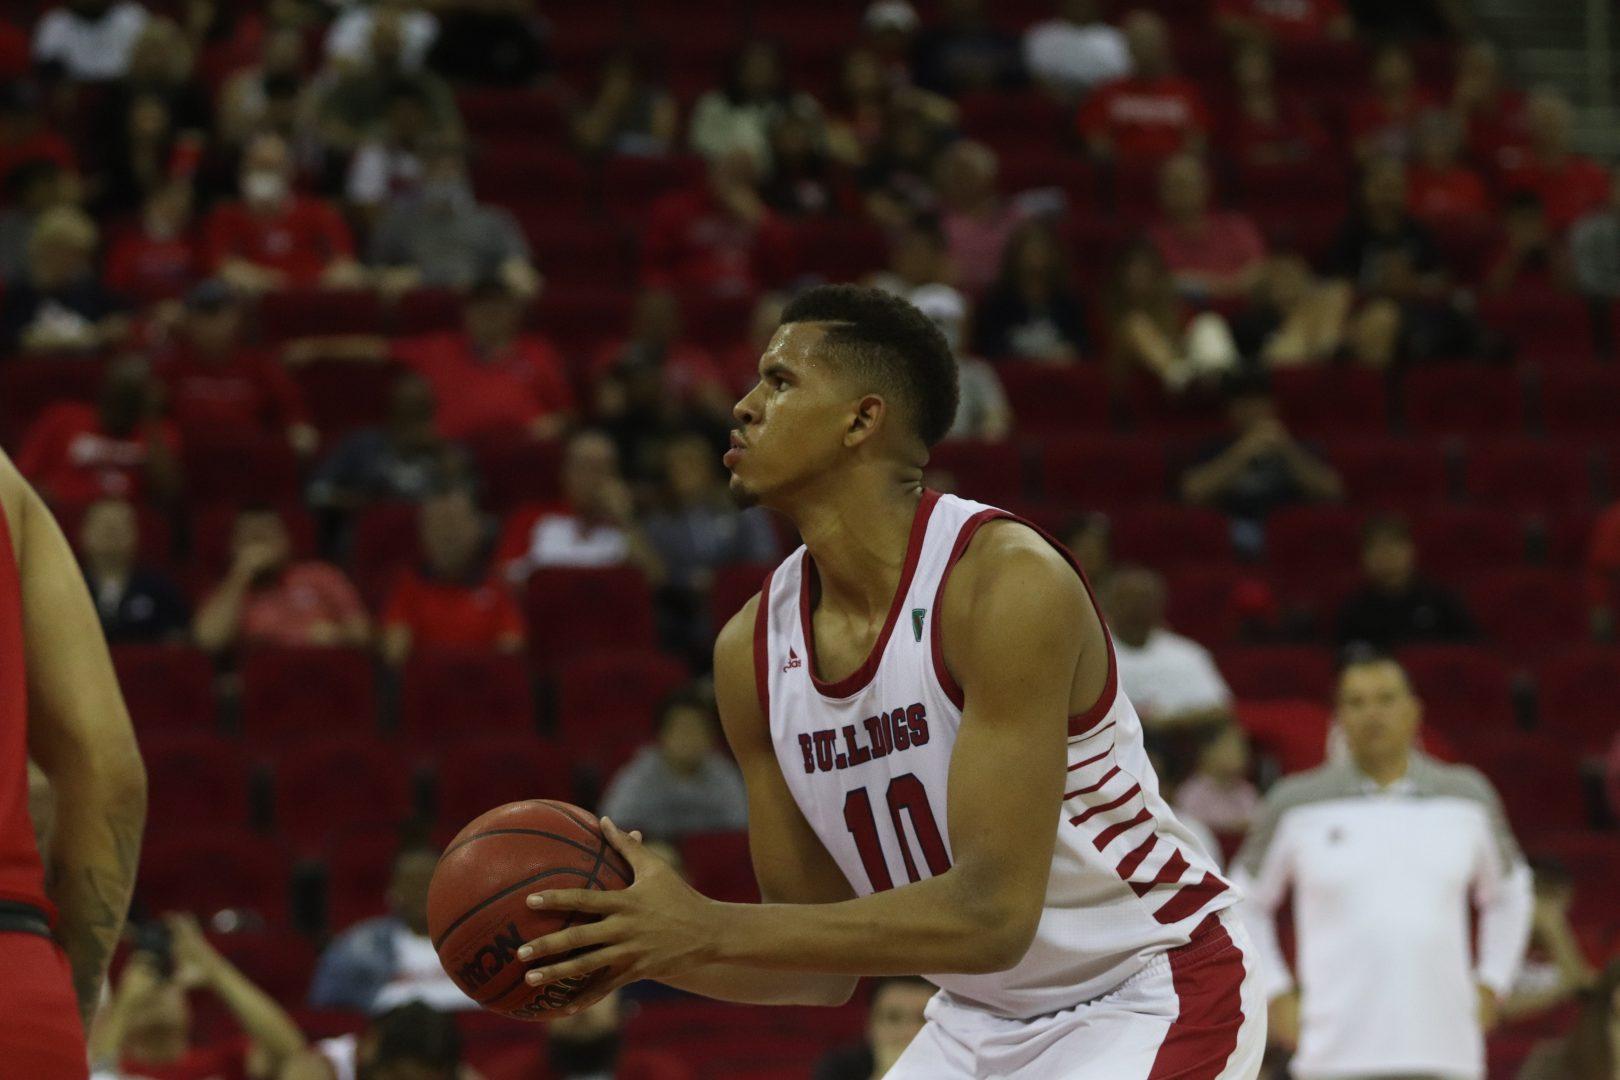 Orlando Robinson against Youngstown State on March 23, 2022 at Save Mart Center. (Melina Kazanjian/The Collegian)